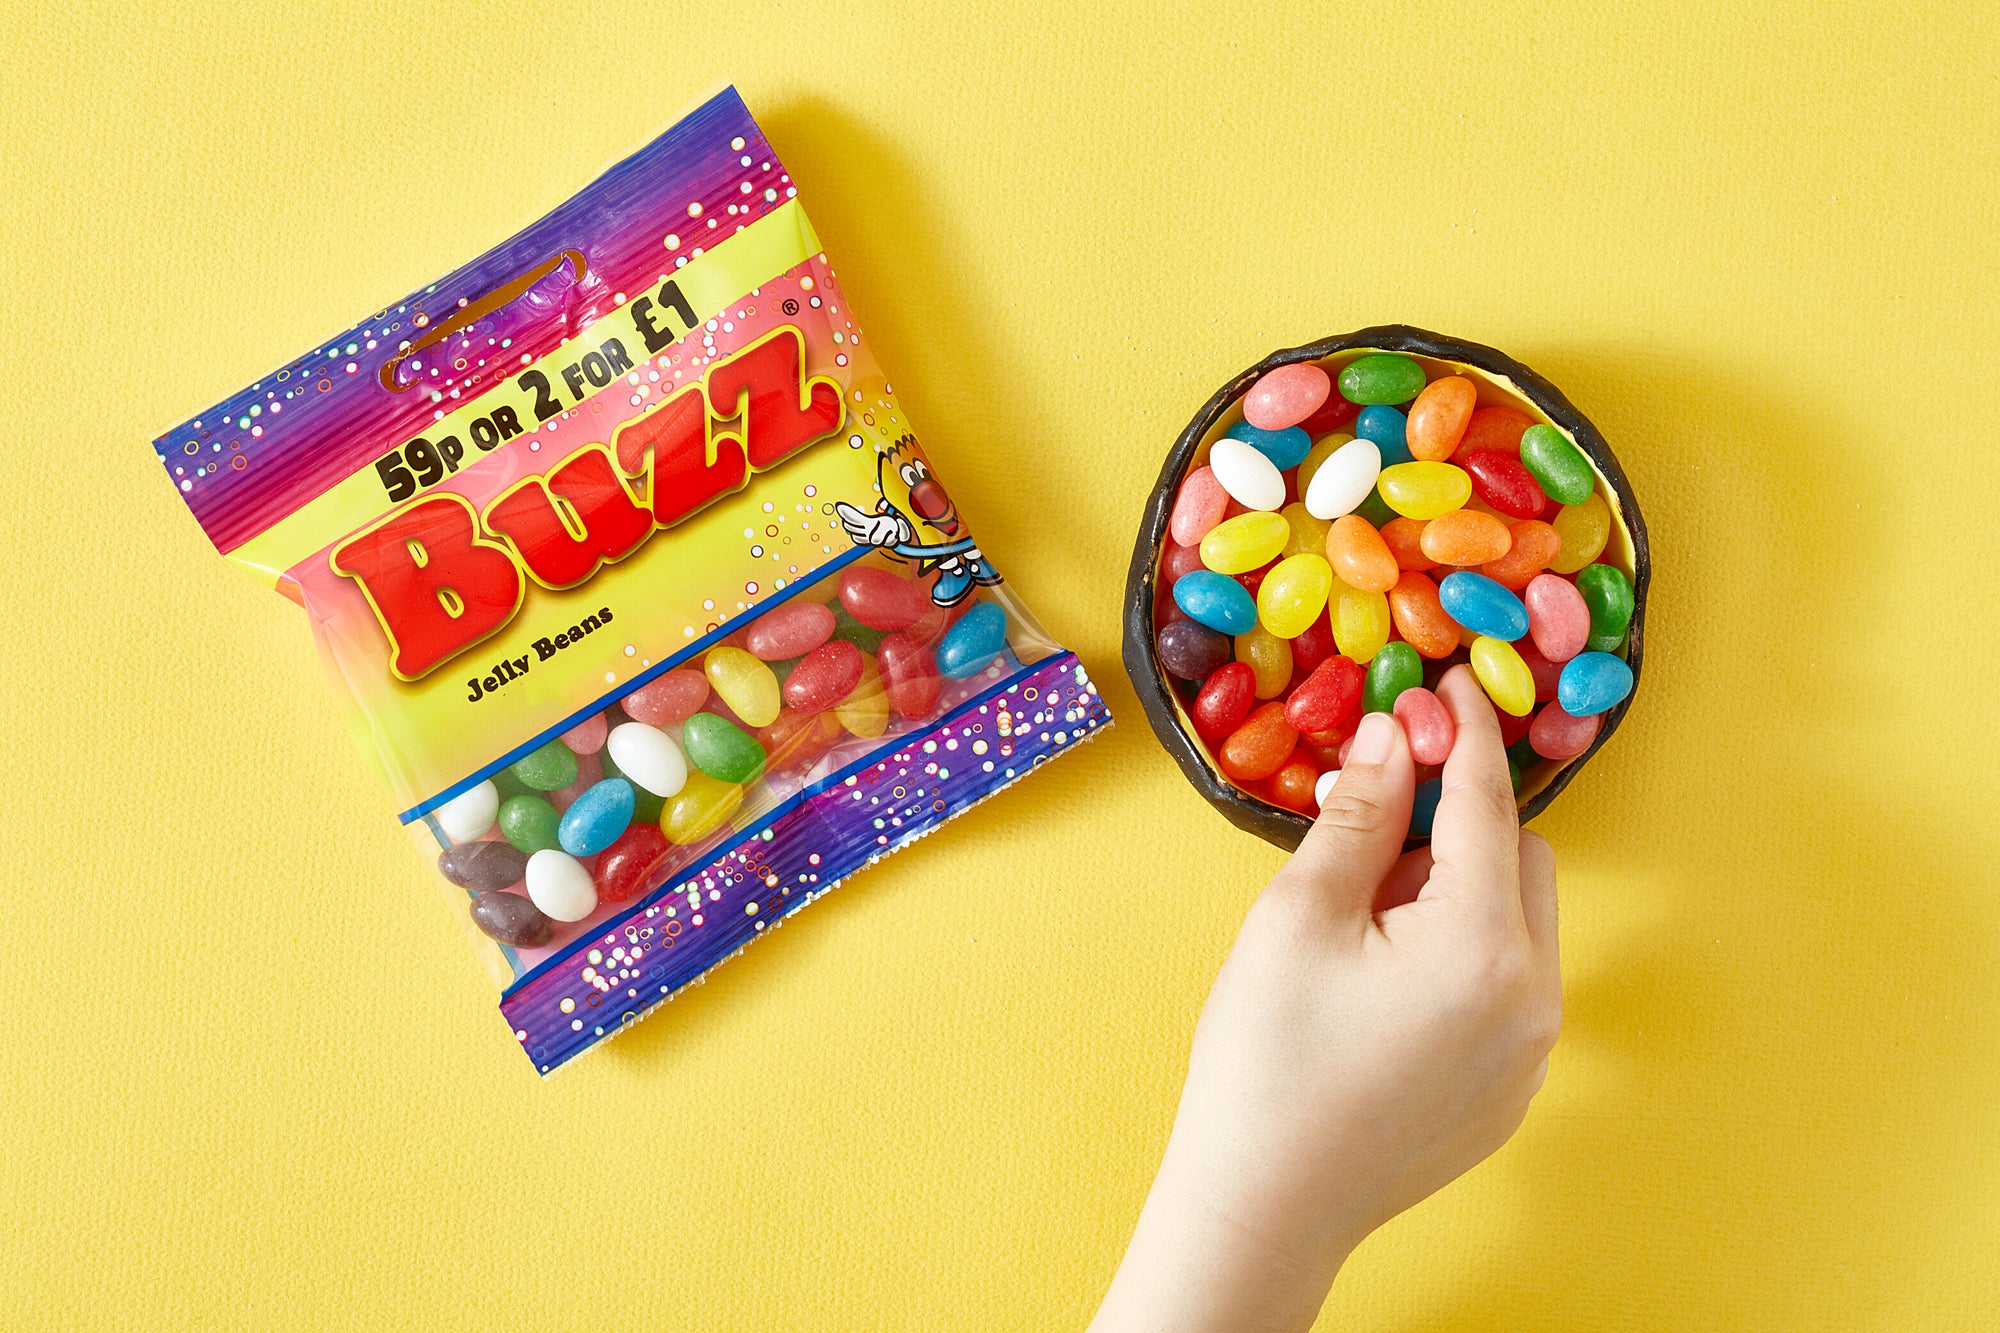 Buzz Sweets Jelly Beans | Kids Bags